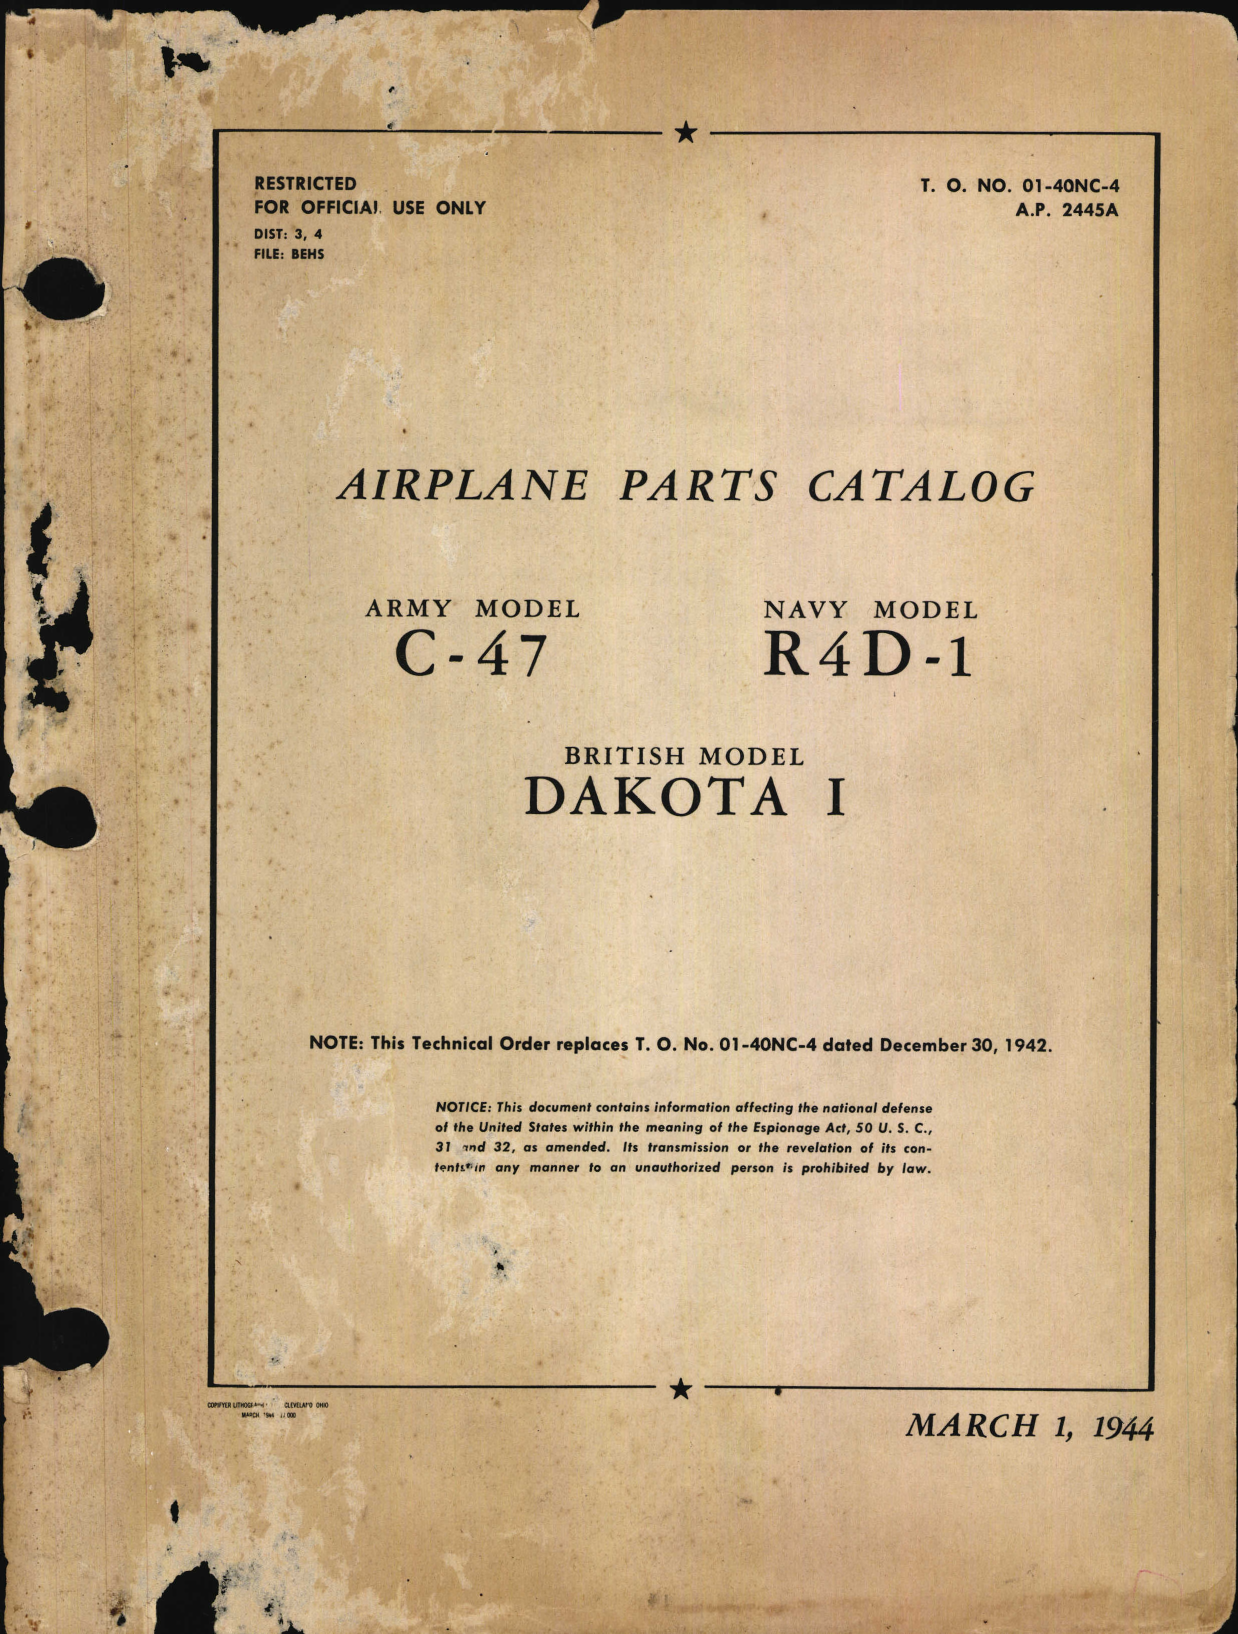 Sample page 1 from AirCorps Library document: Parts Catalog for C-47 and R4D-1